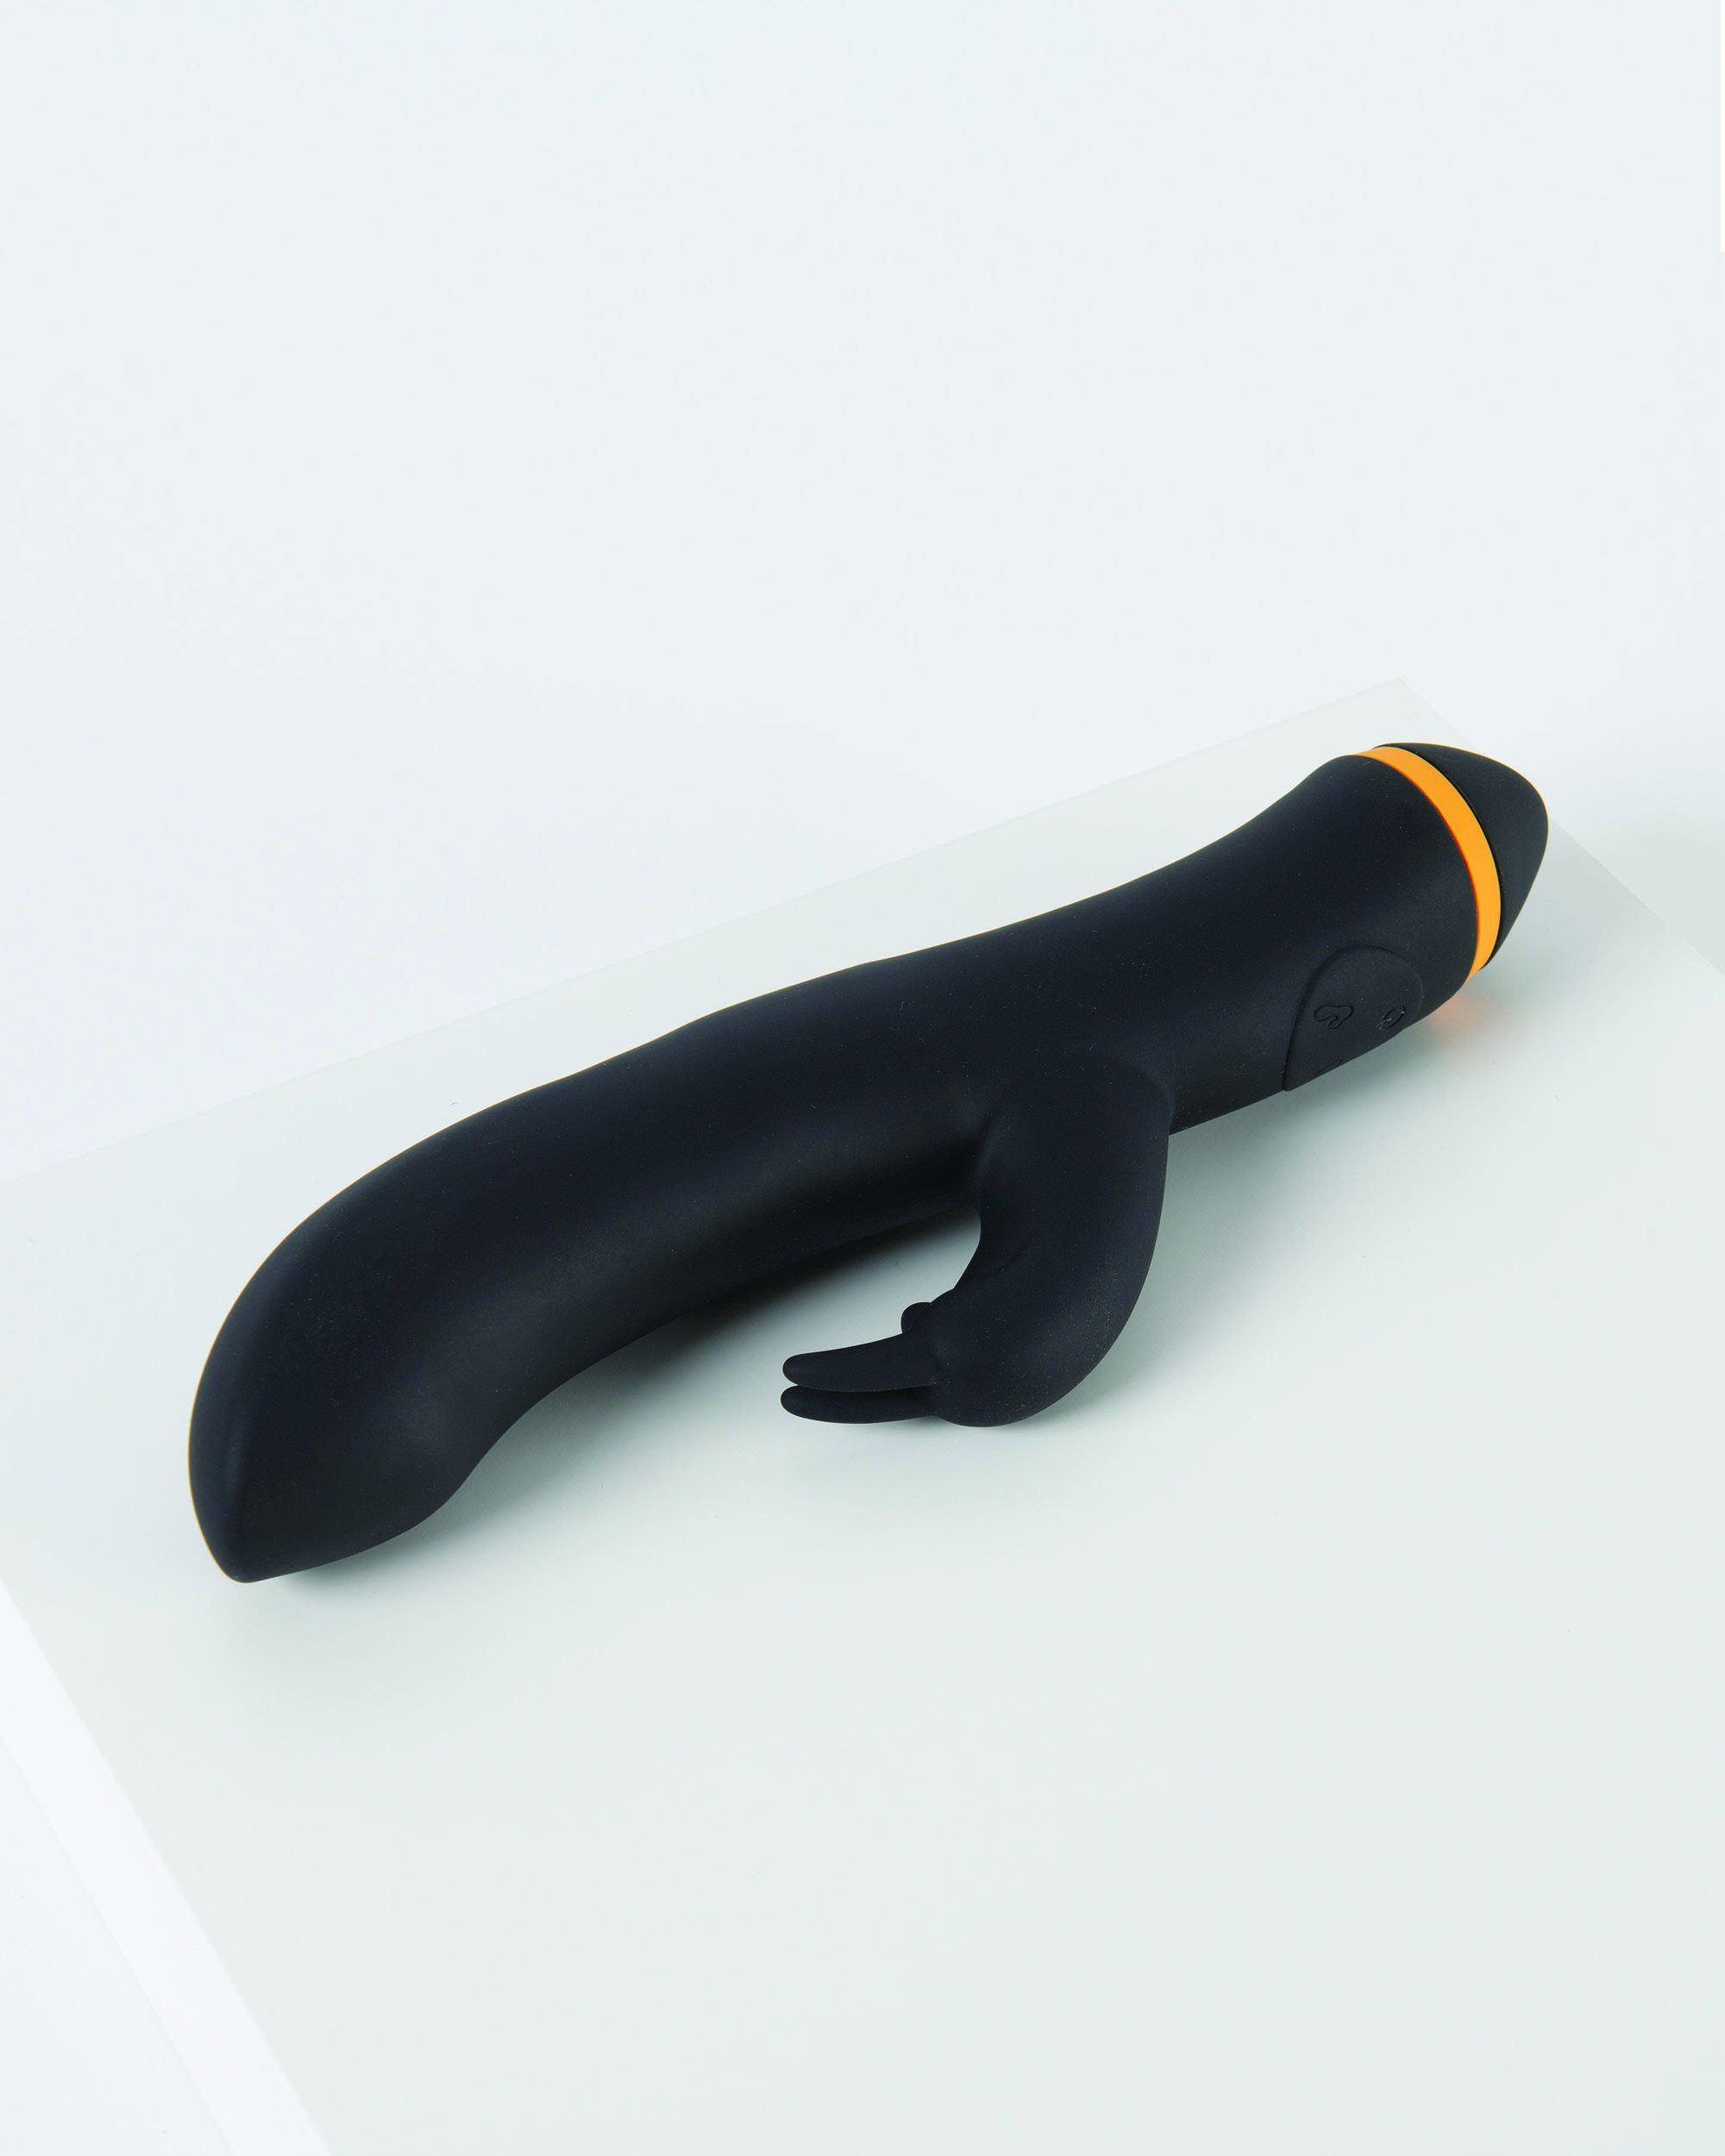 The Turbo Rabbit is made with supple, soft-touch silicone designed to fit your body perfectly and deliver intense power to your clit and G-spot. The powerful motor is designed to send deep vibrations through the body, intensely stimulating and targetin #sex